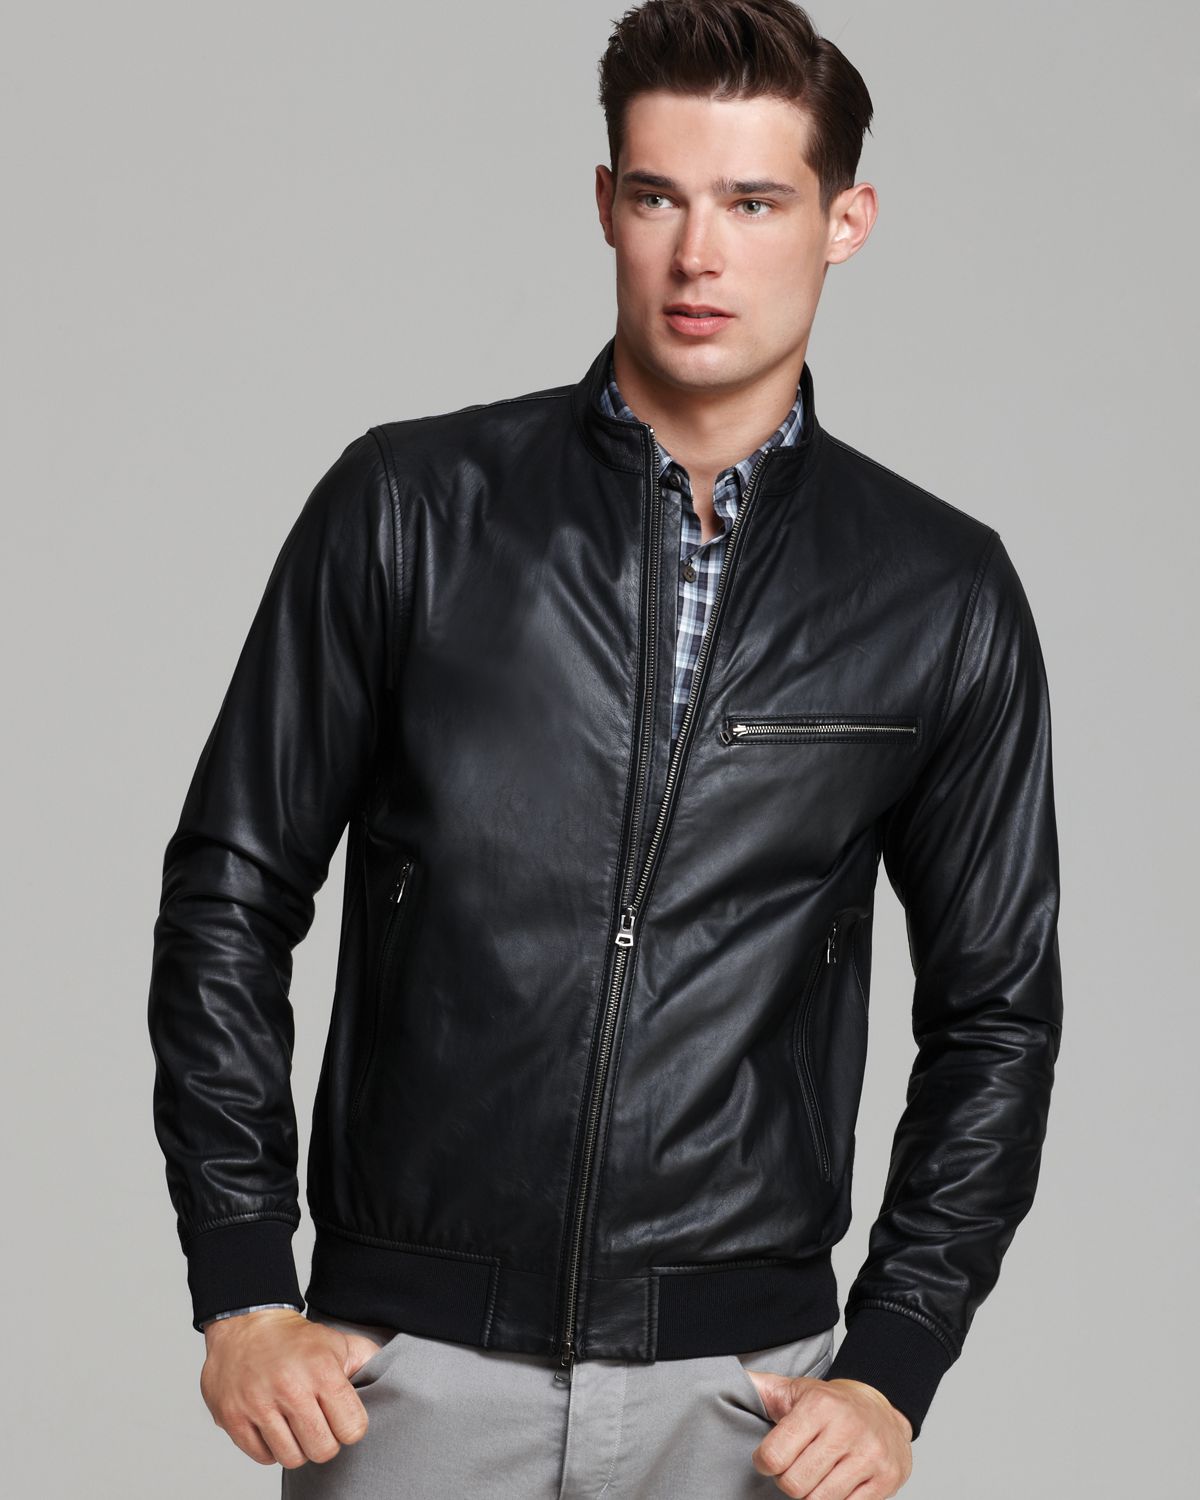 Theory Viek L Skyward Leather Jacket in Black for Men - Lyst